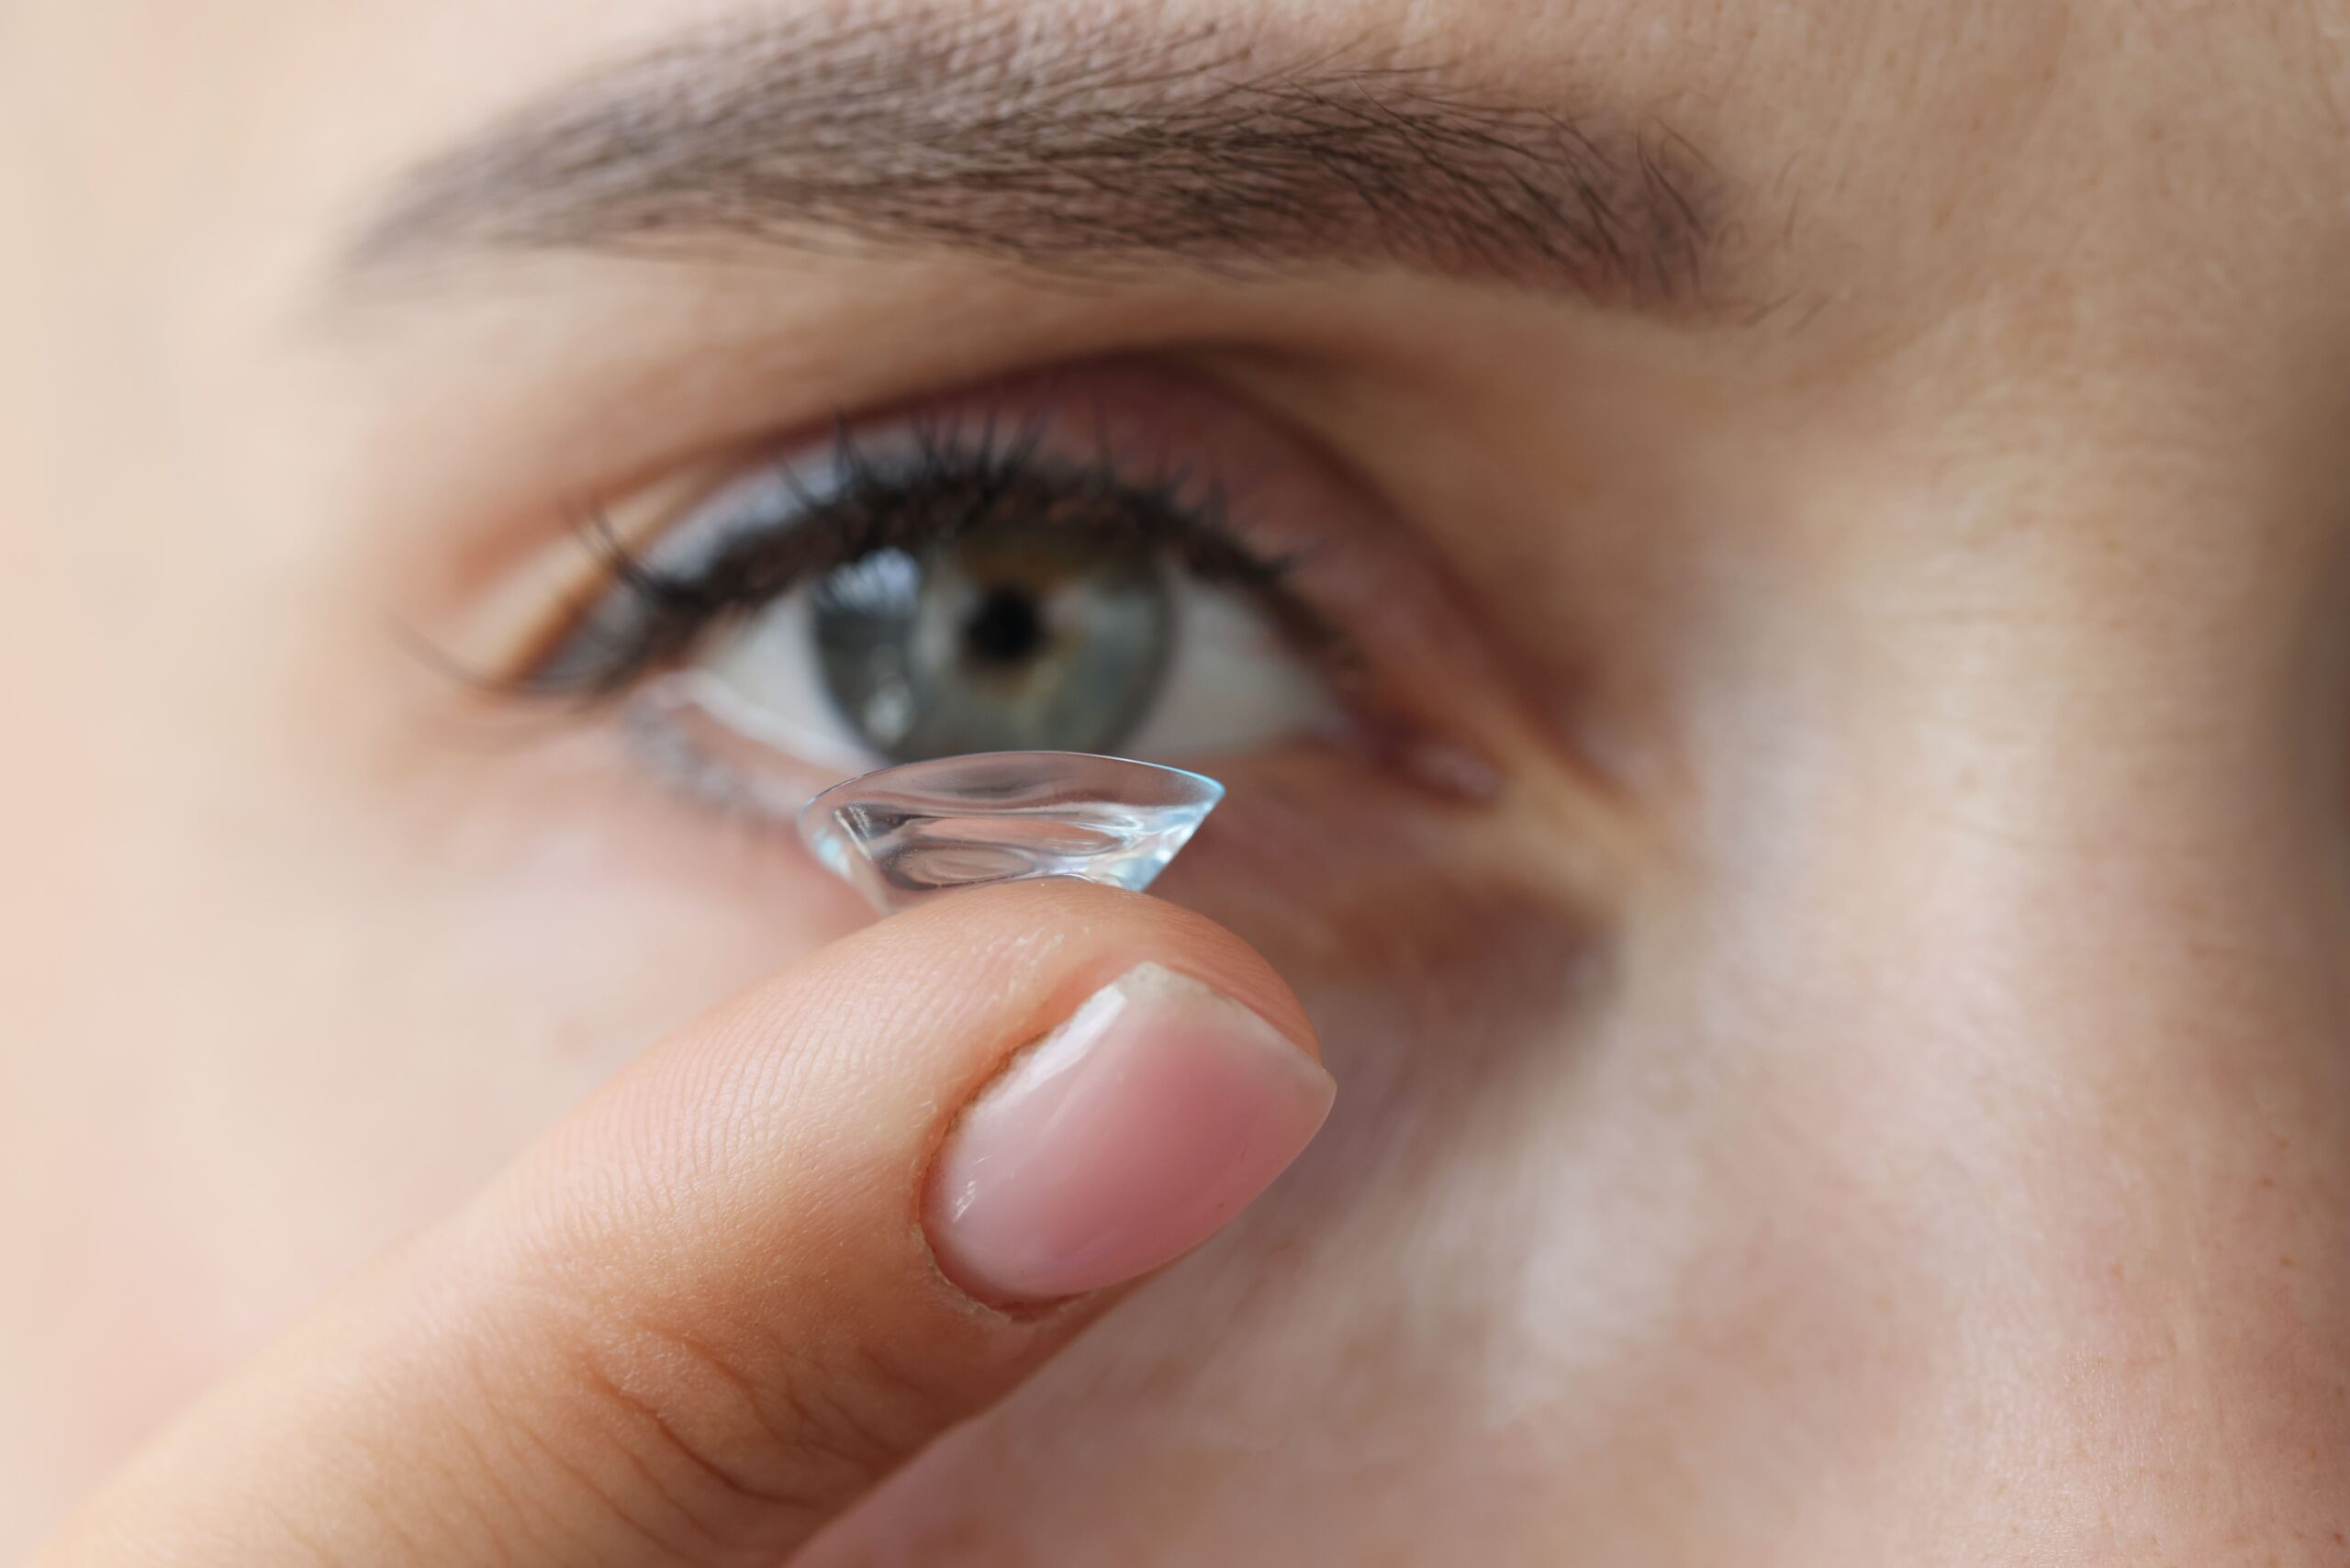 Common Eye Infections related to Contact Lenses